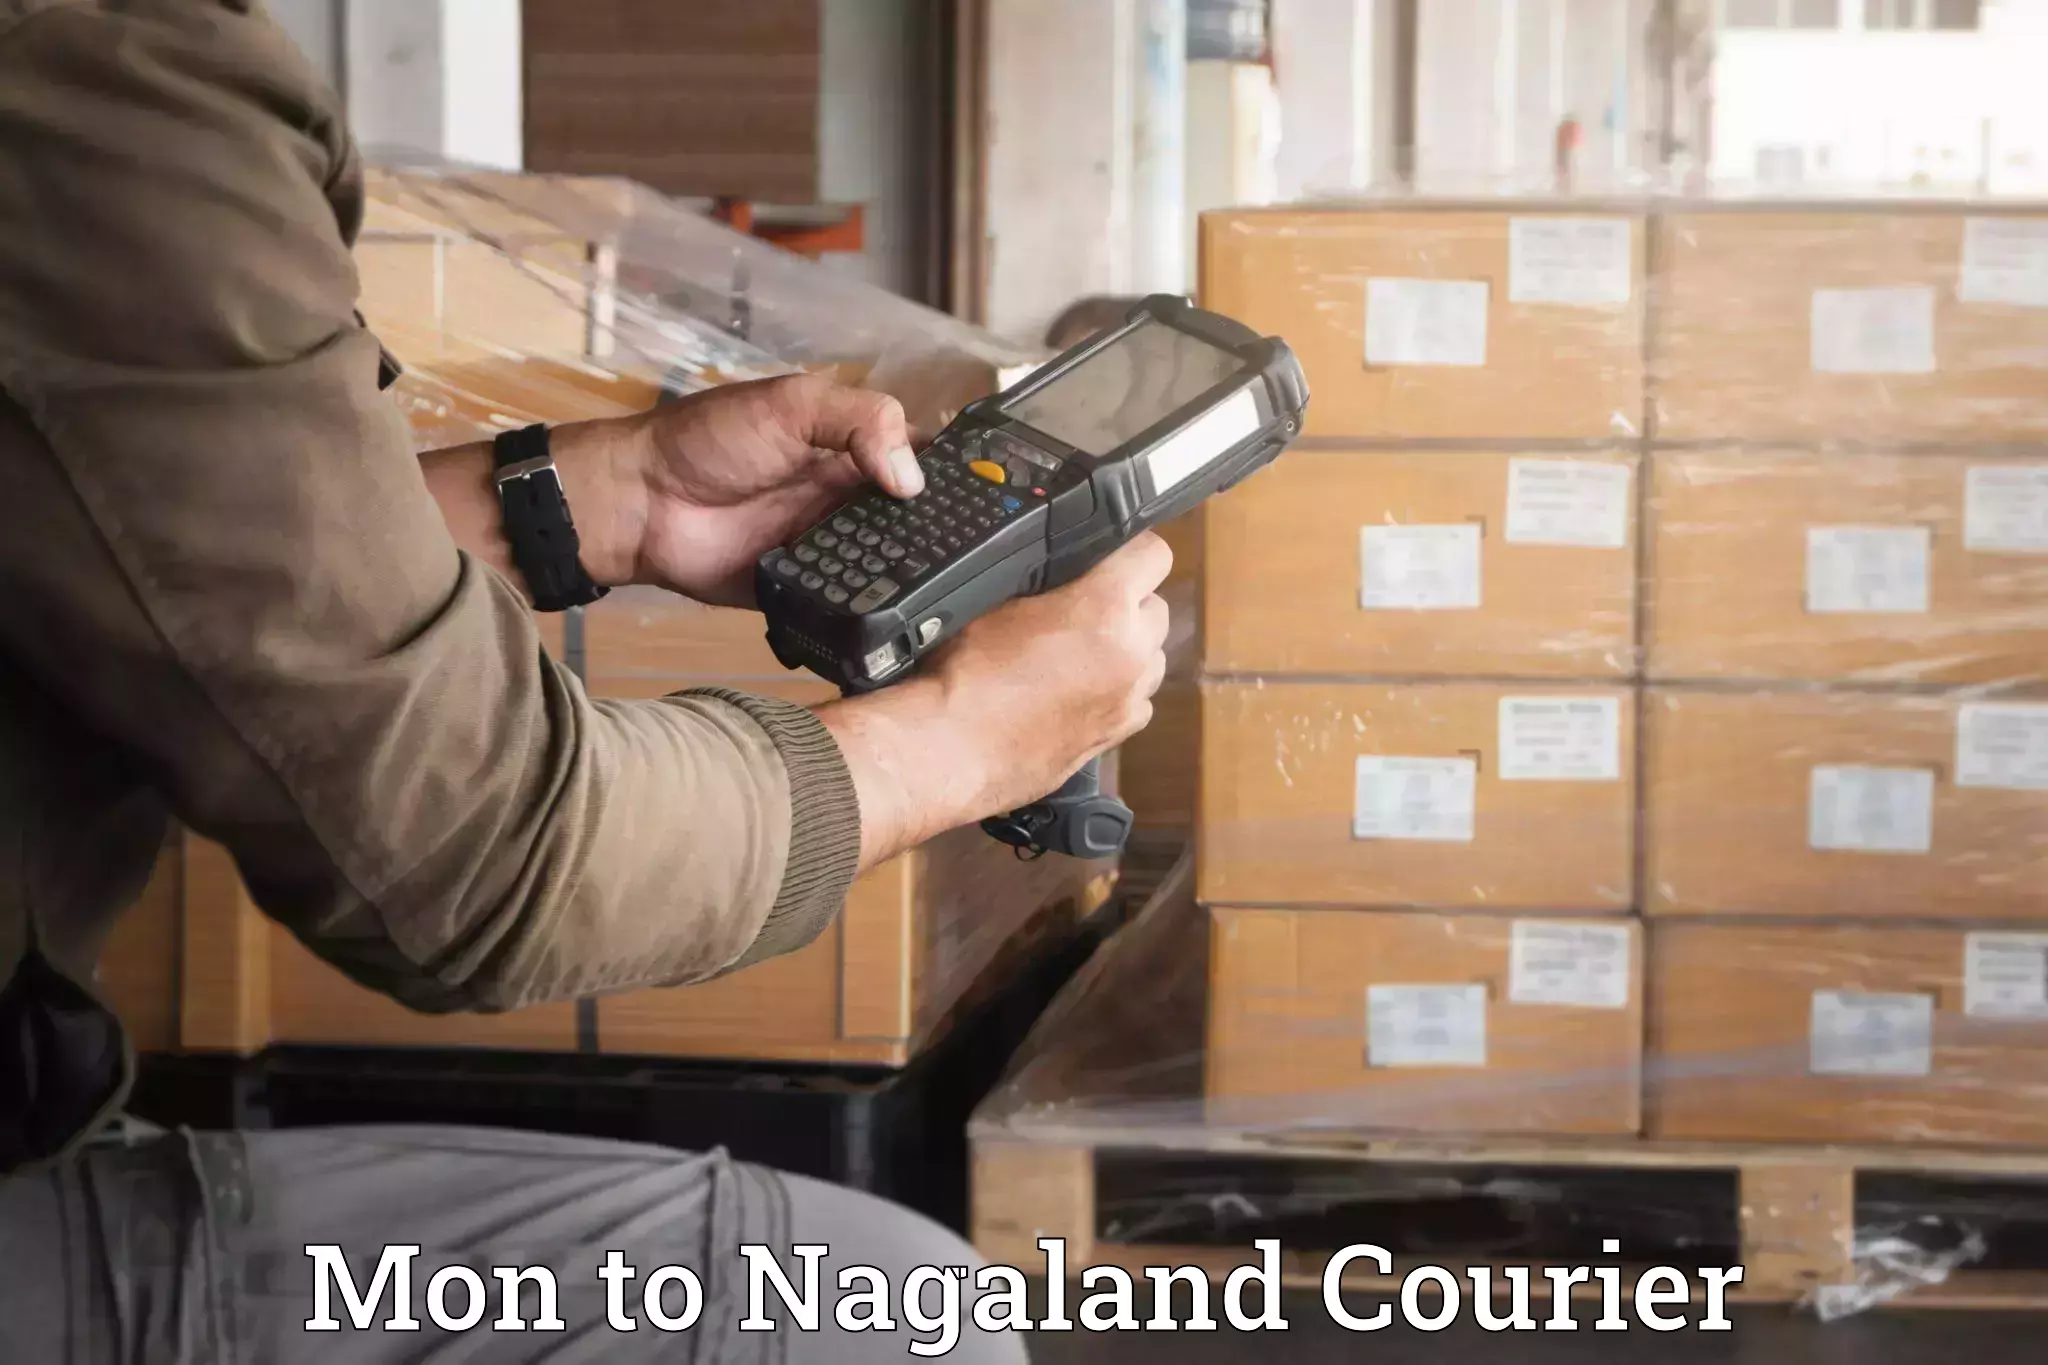 Quality moving services Mon to Nagaland